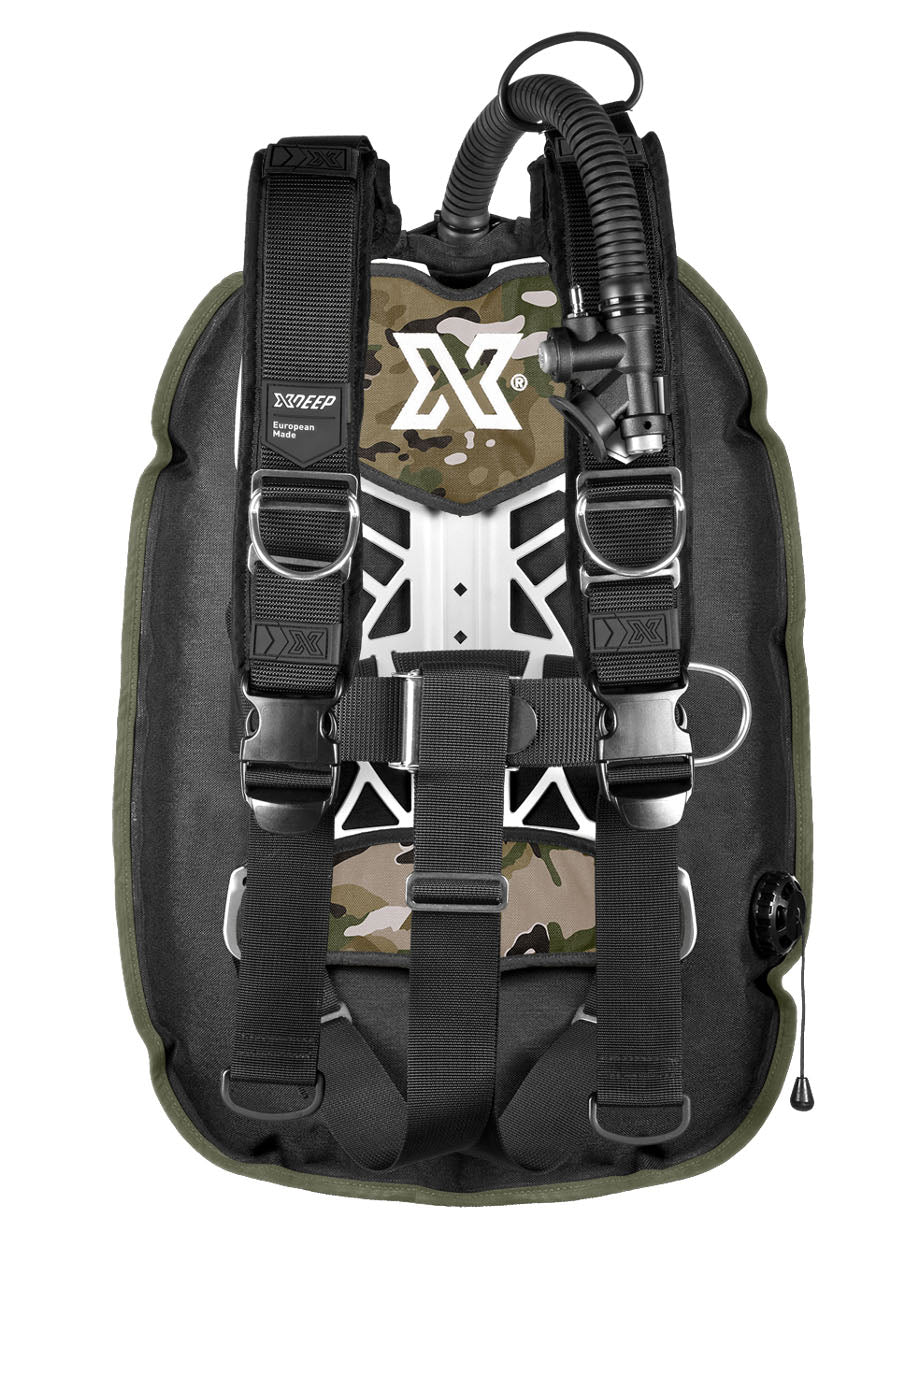 XDEEP GHOST Full Setup with Standard or Deluxe harness